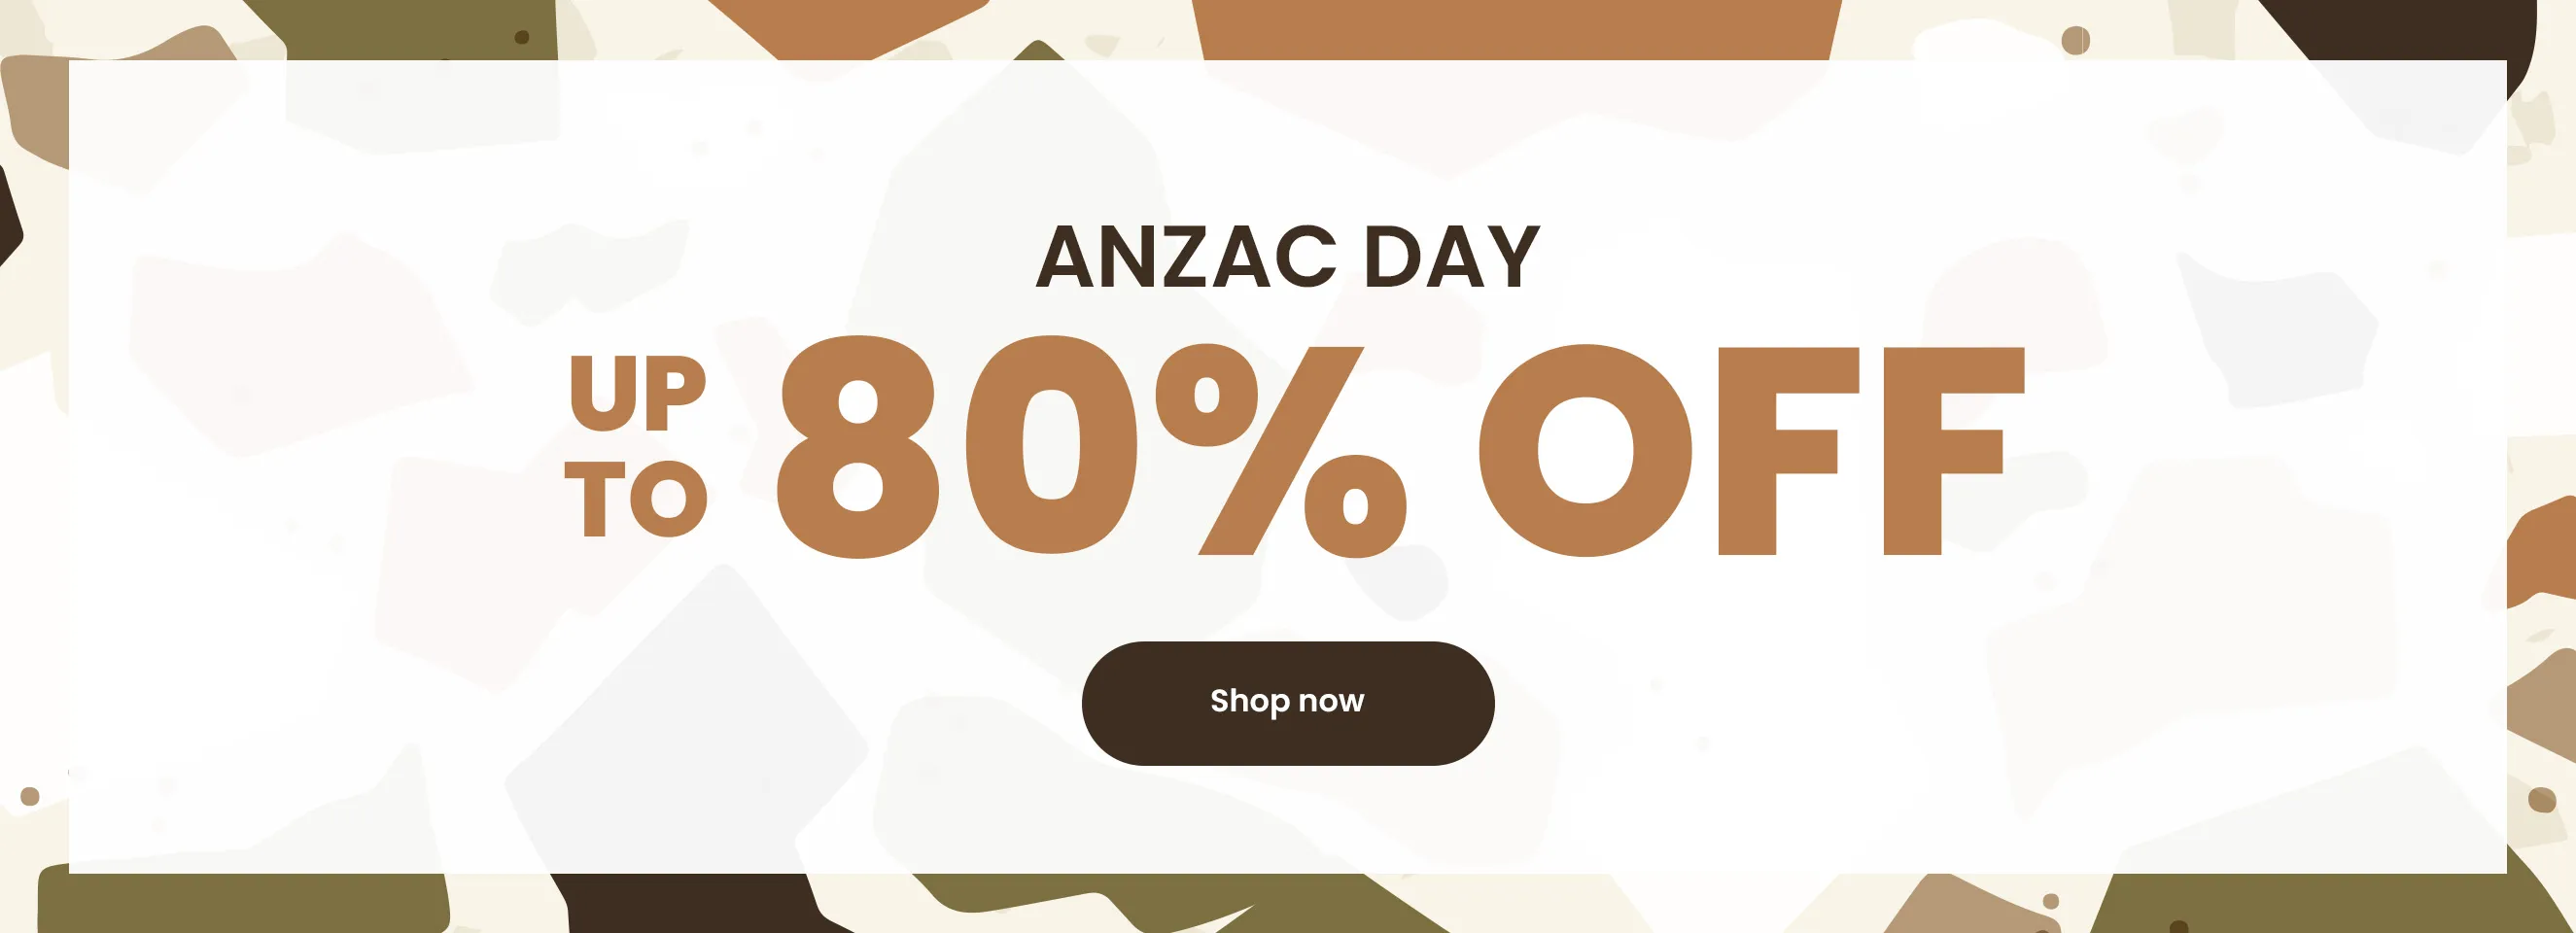 Click it to join Anzac Day activity